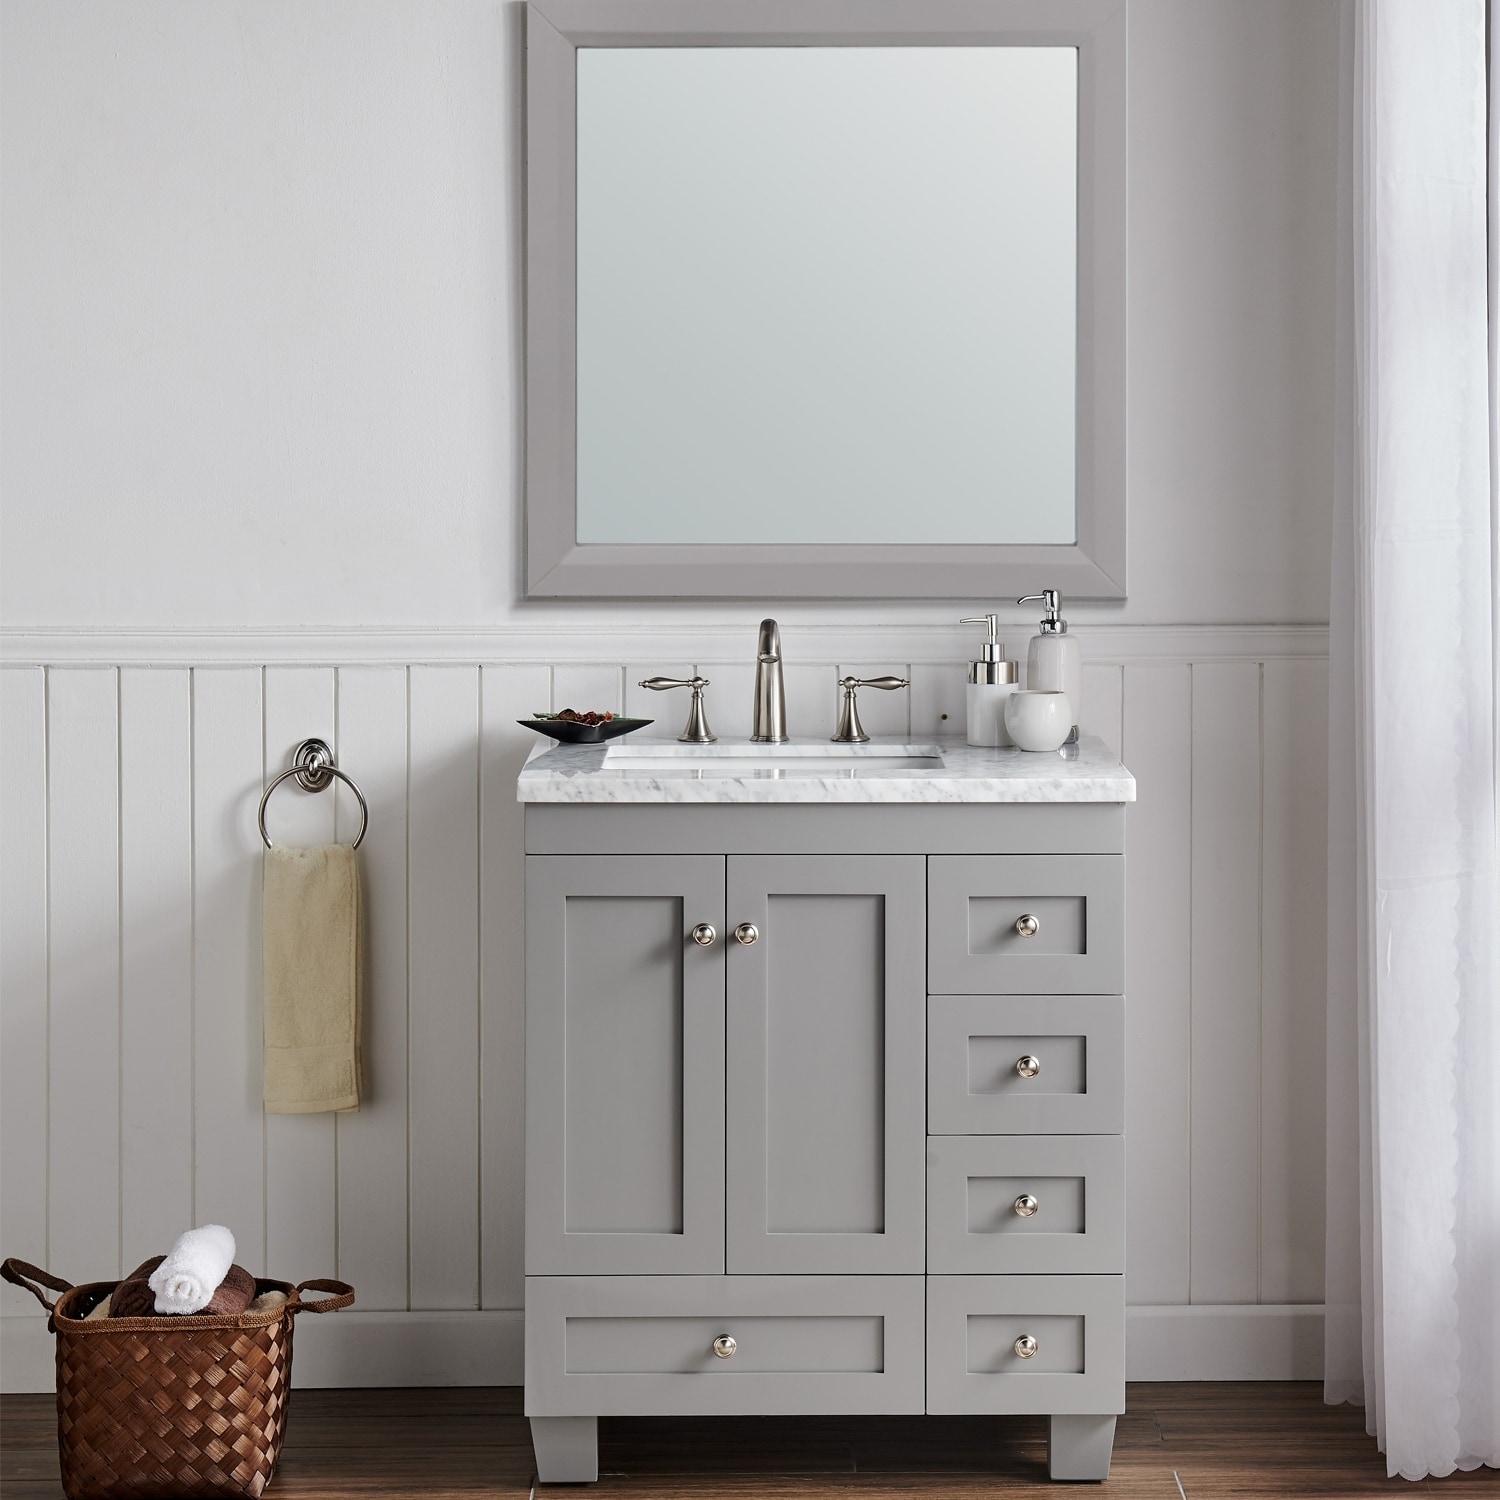 Eviva Acclaim 30 Inch Gray Transitional Bathroom Vanity With White Carrara Marble Countertop And Undermount Porcelain Sink Overstock 10609864